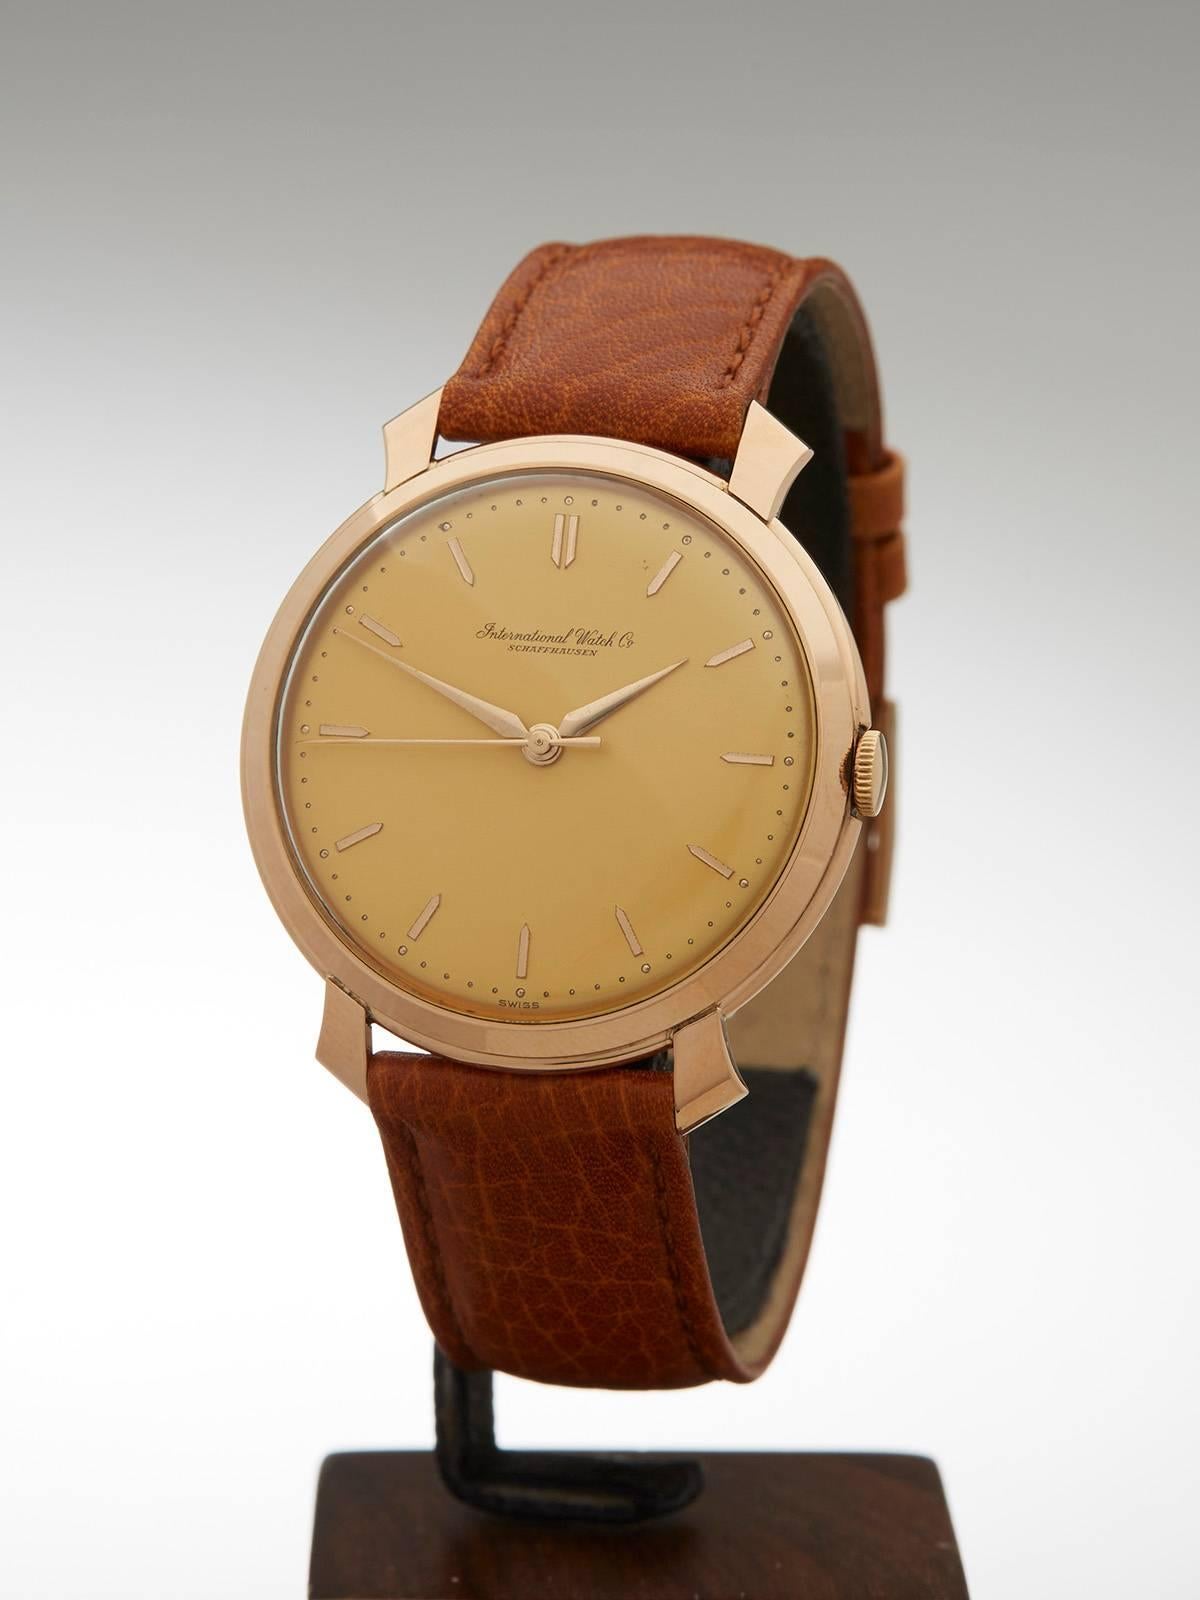 
Ref: COM606
Conditions: 9 - Excellent Condition
Age:	1960
Case Diameter: 37 mm
Case Size: 36.8mm
Box And Papers: Period IWC box
Movement: Mechanical Wind
Case: 18k Rose Gold
Dial: Gold
Bracelet: IWC strap
Strap Length: Adjustable up to 20cm
Strap